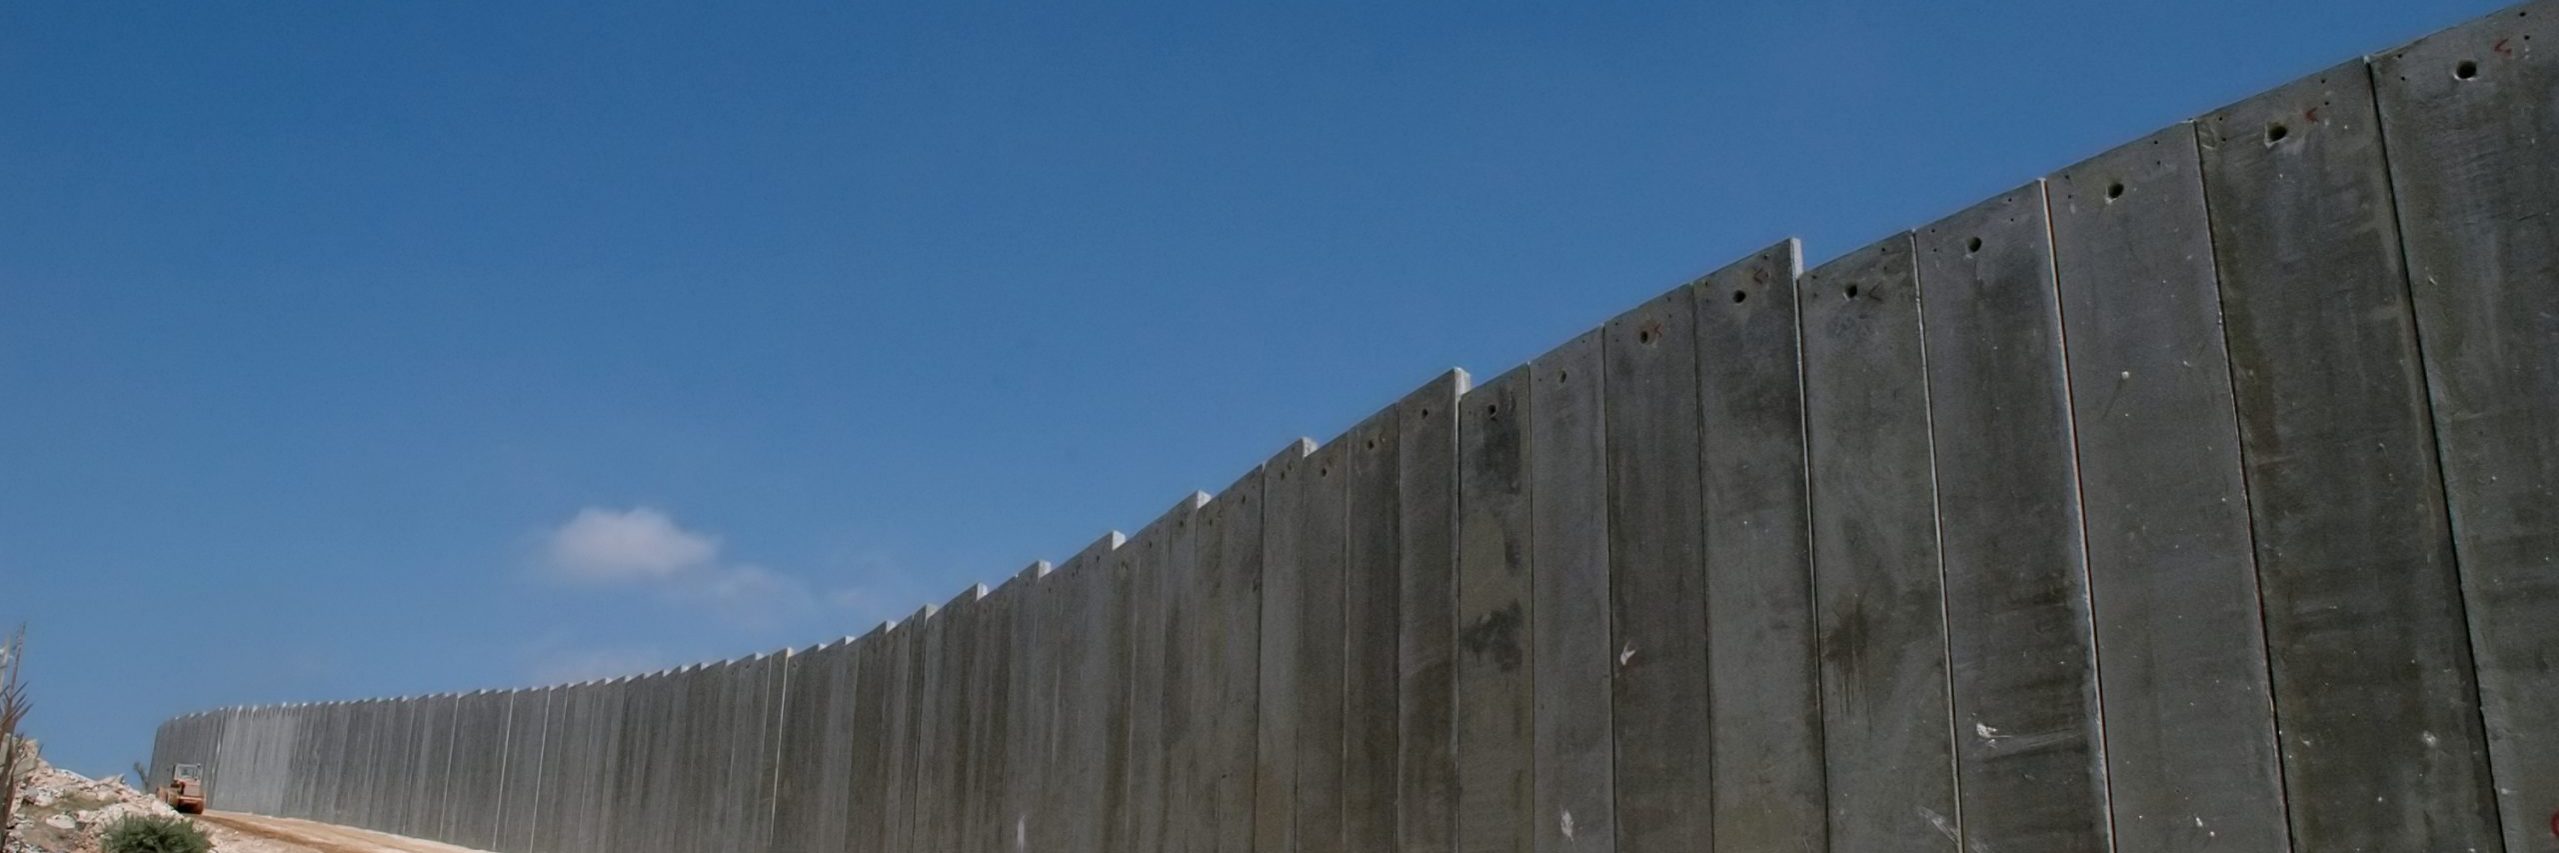 The wall separating Israel and Palestine at the west bank